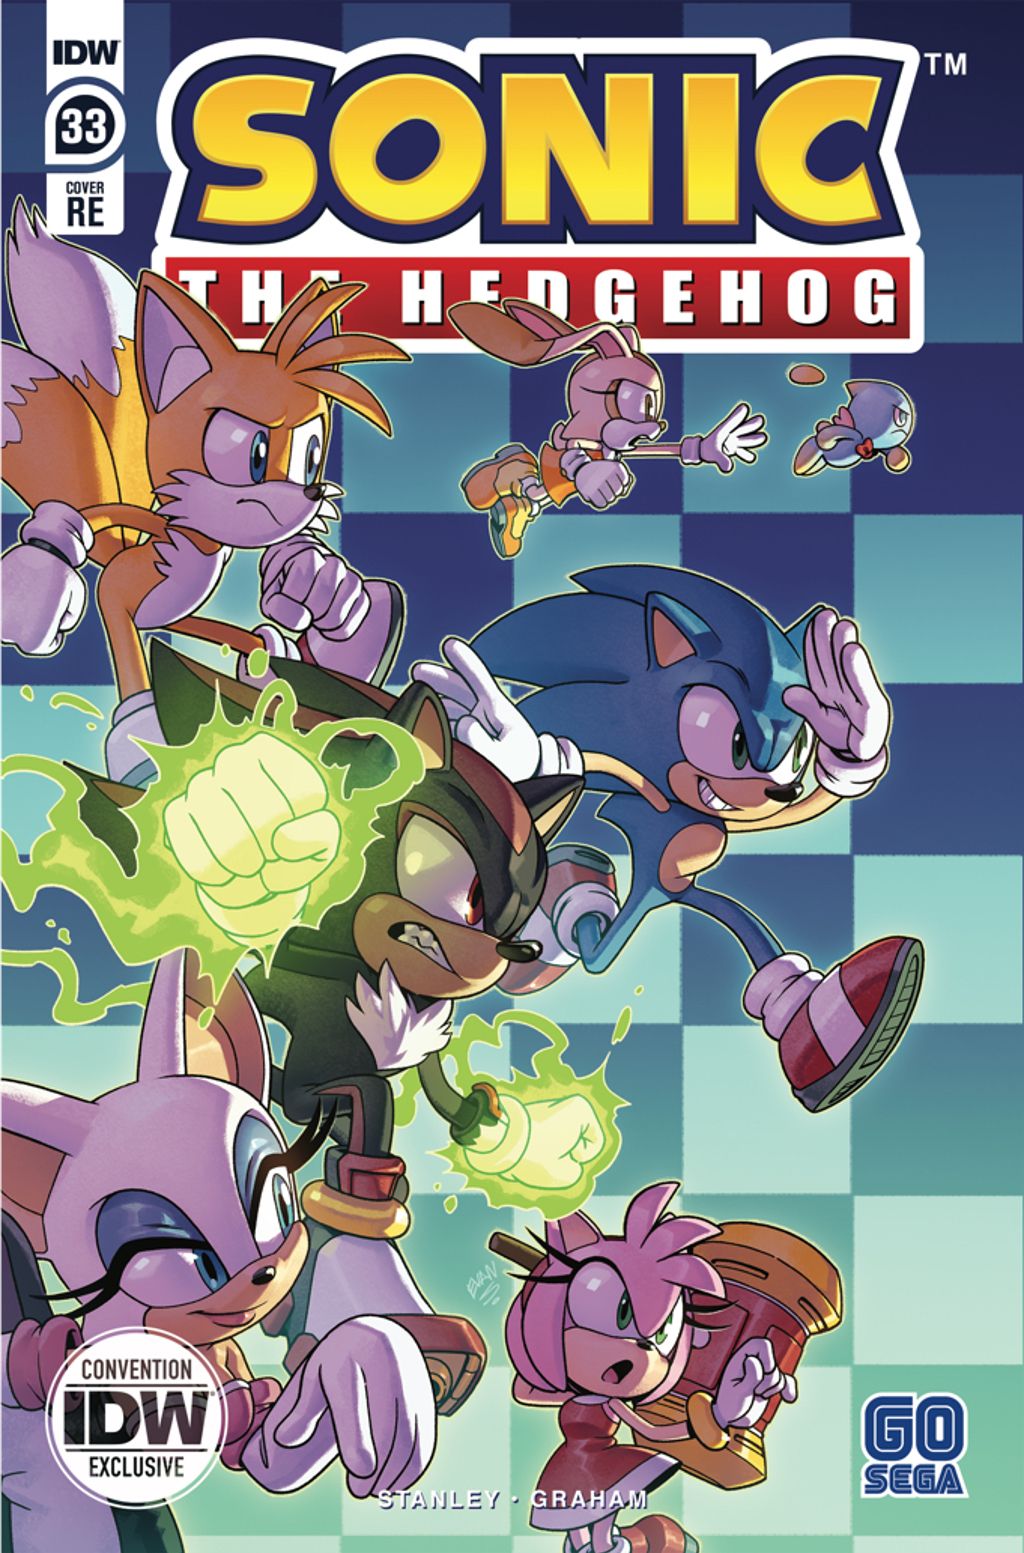  Sonic The Hedgehog, Vol. 14: Overpowered